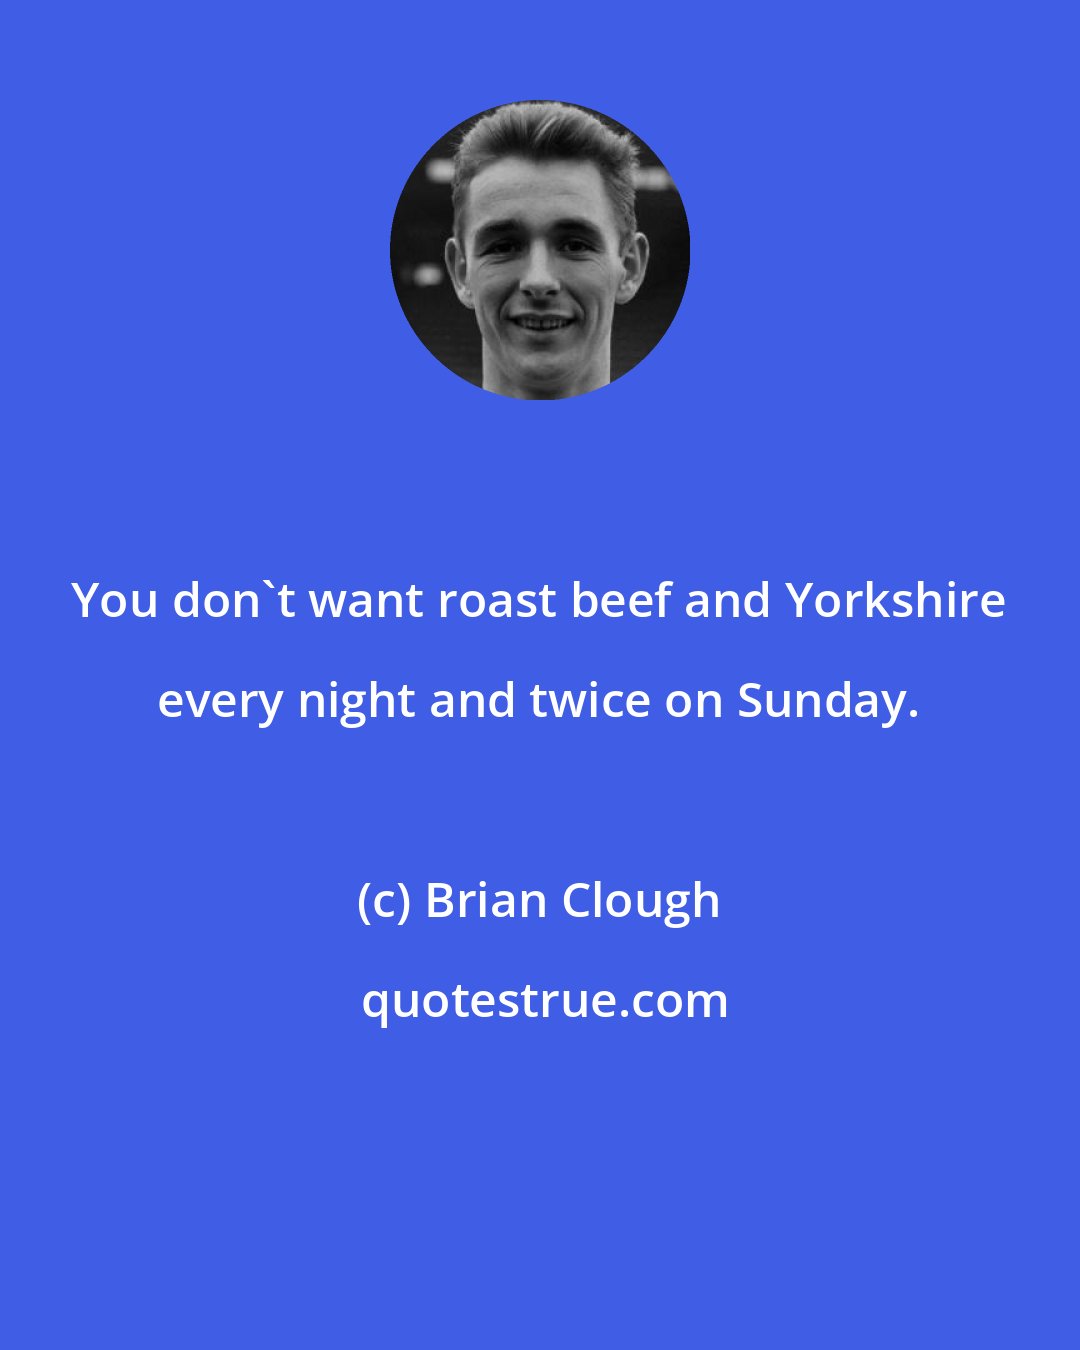 Brian Clough: You don't want roast beef and Yorkshire every night and twice on Sunday.